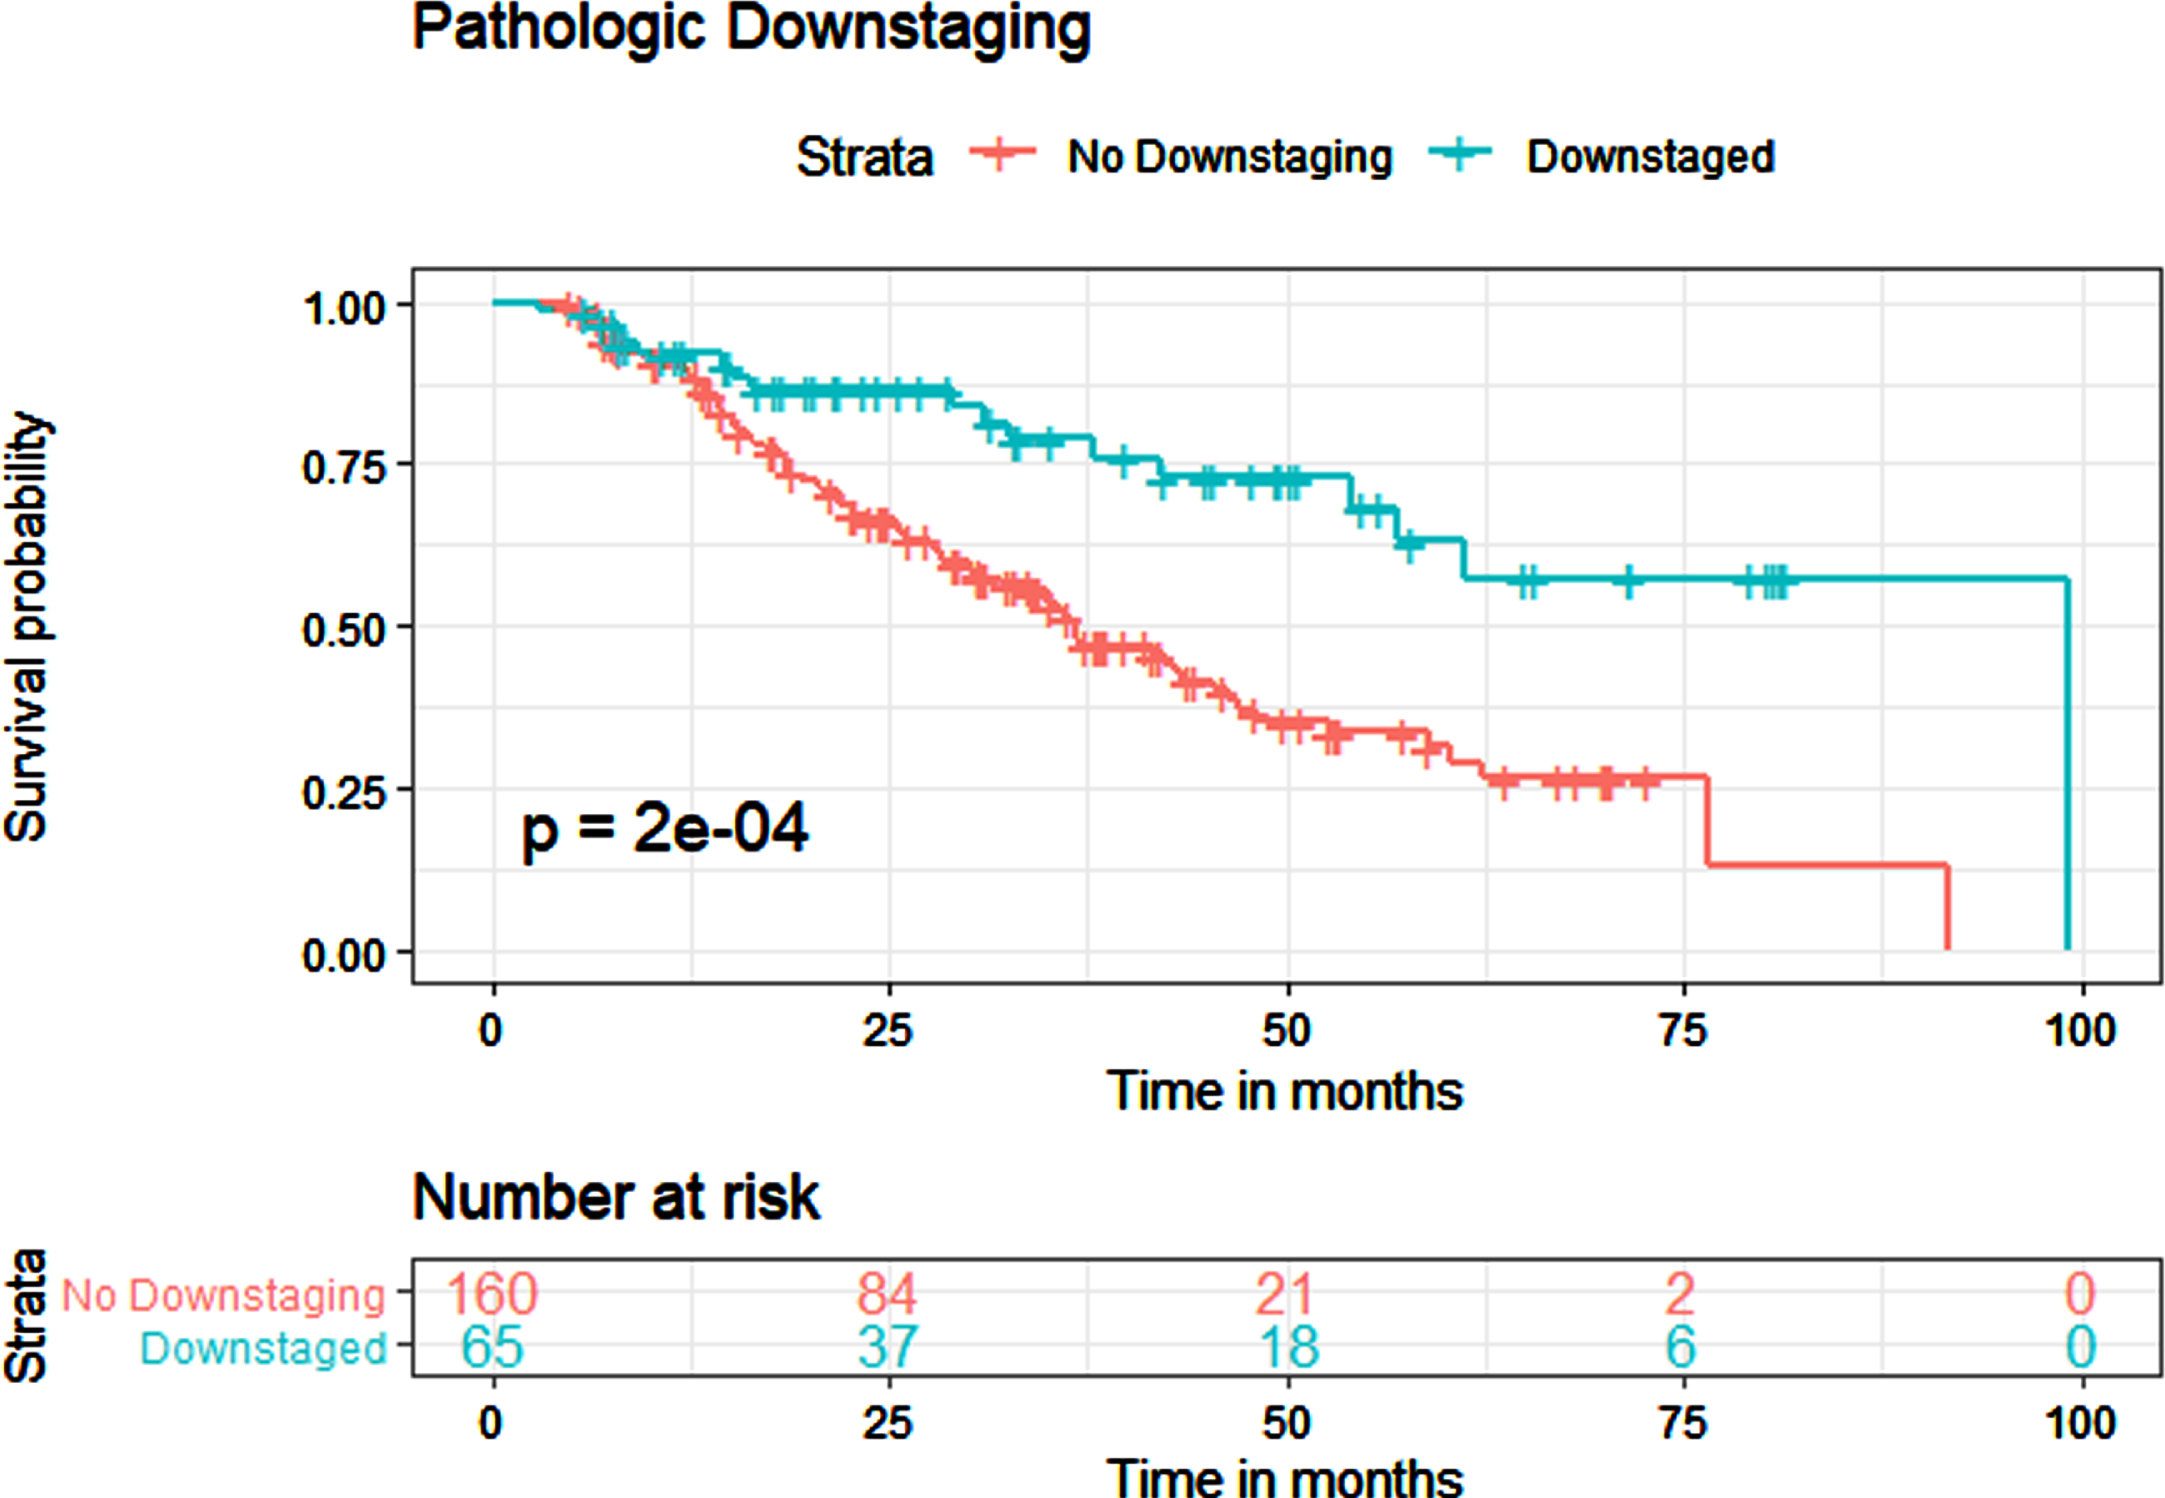 Kaplan-Meier estimates for overall survival in patients who received NAC, with and without pathological downstaging.